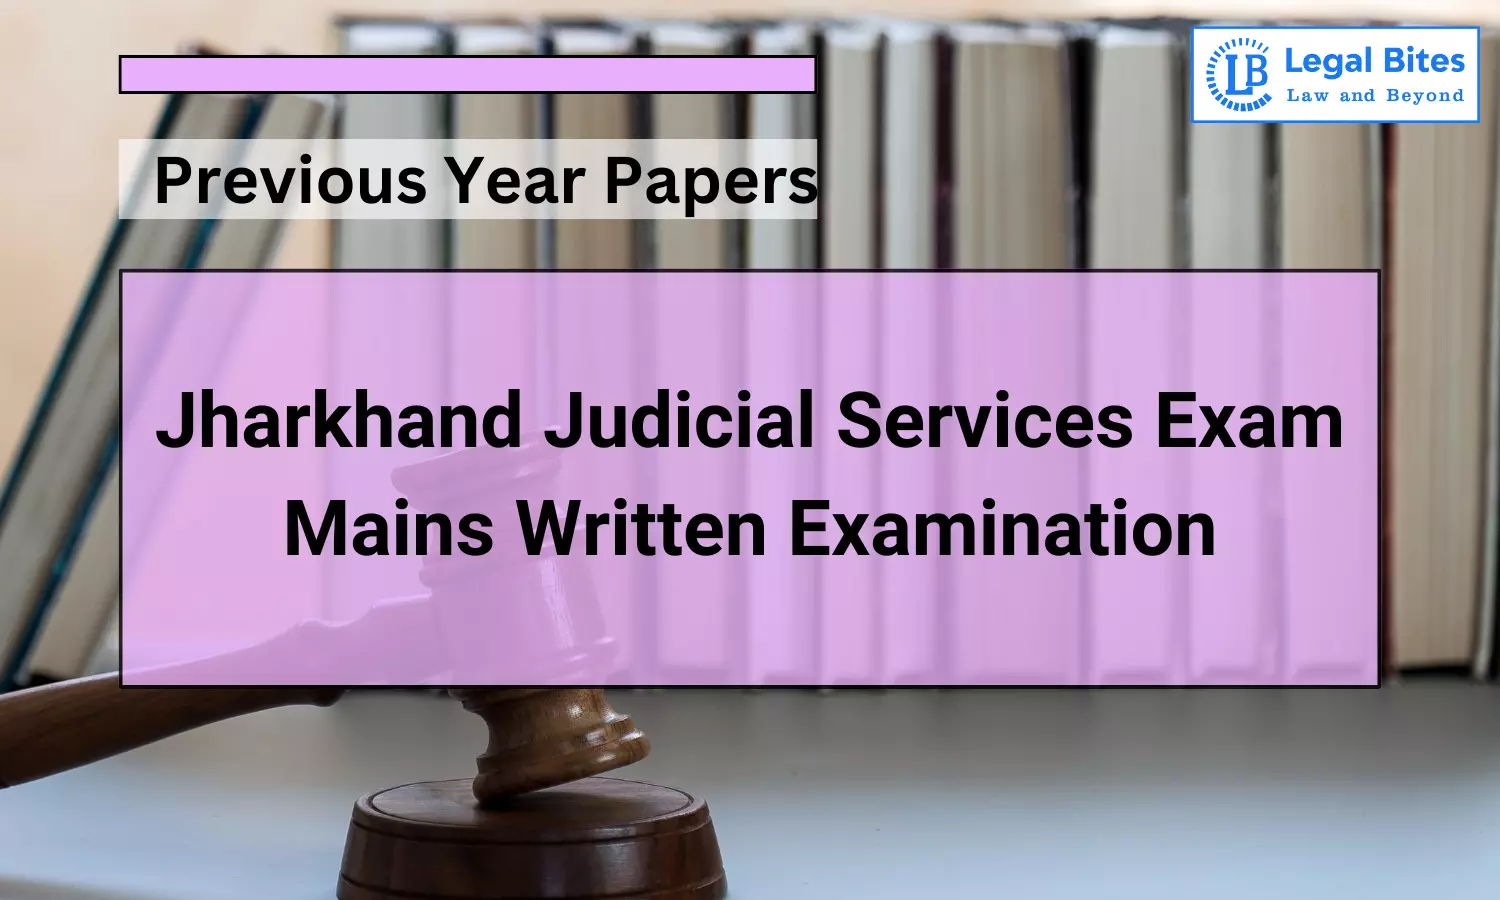 Jharkhand Judicial Services Exam Mains 2014 Previous Year Paper II | Transfer of Property Act, Contract Act, Sales of Goods Act, Negotiable Instruments Act, Arbitration and Conciliation Act